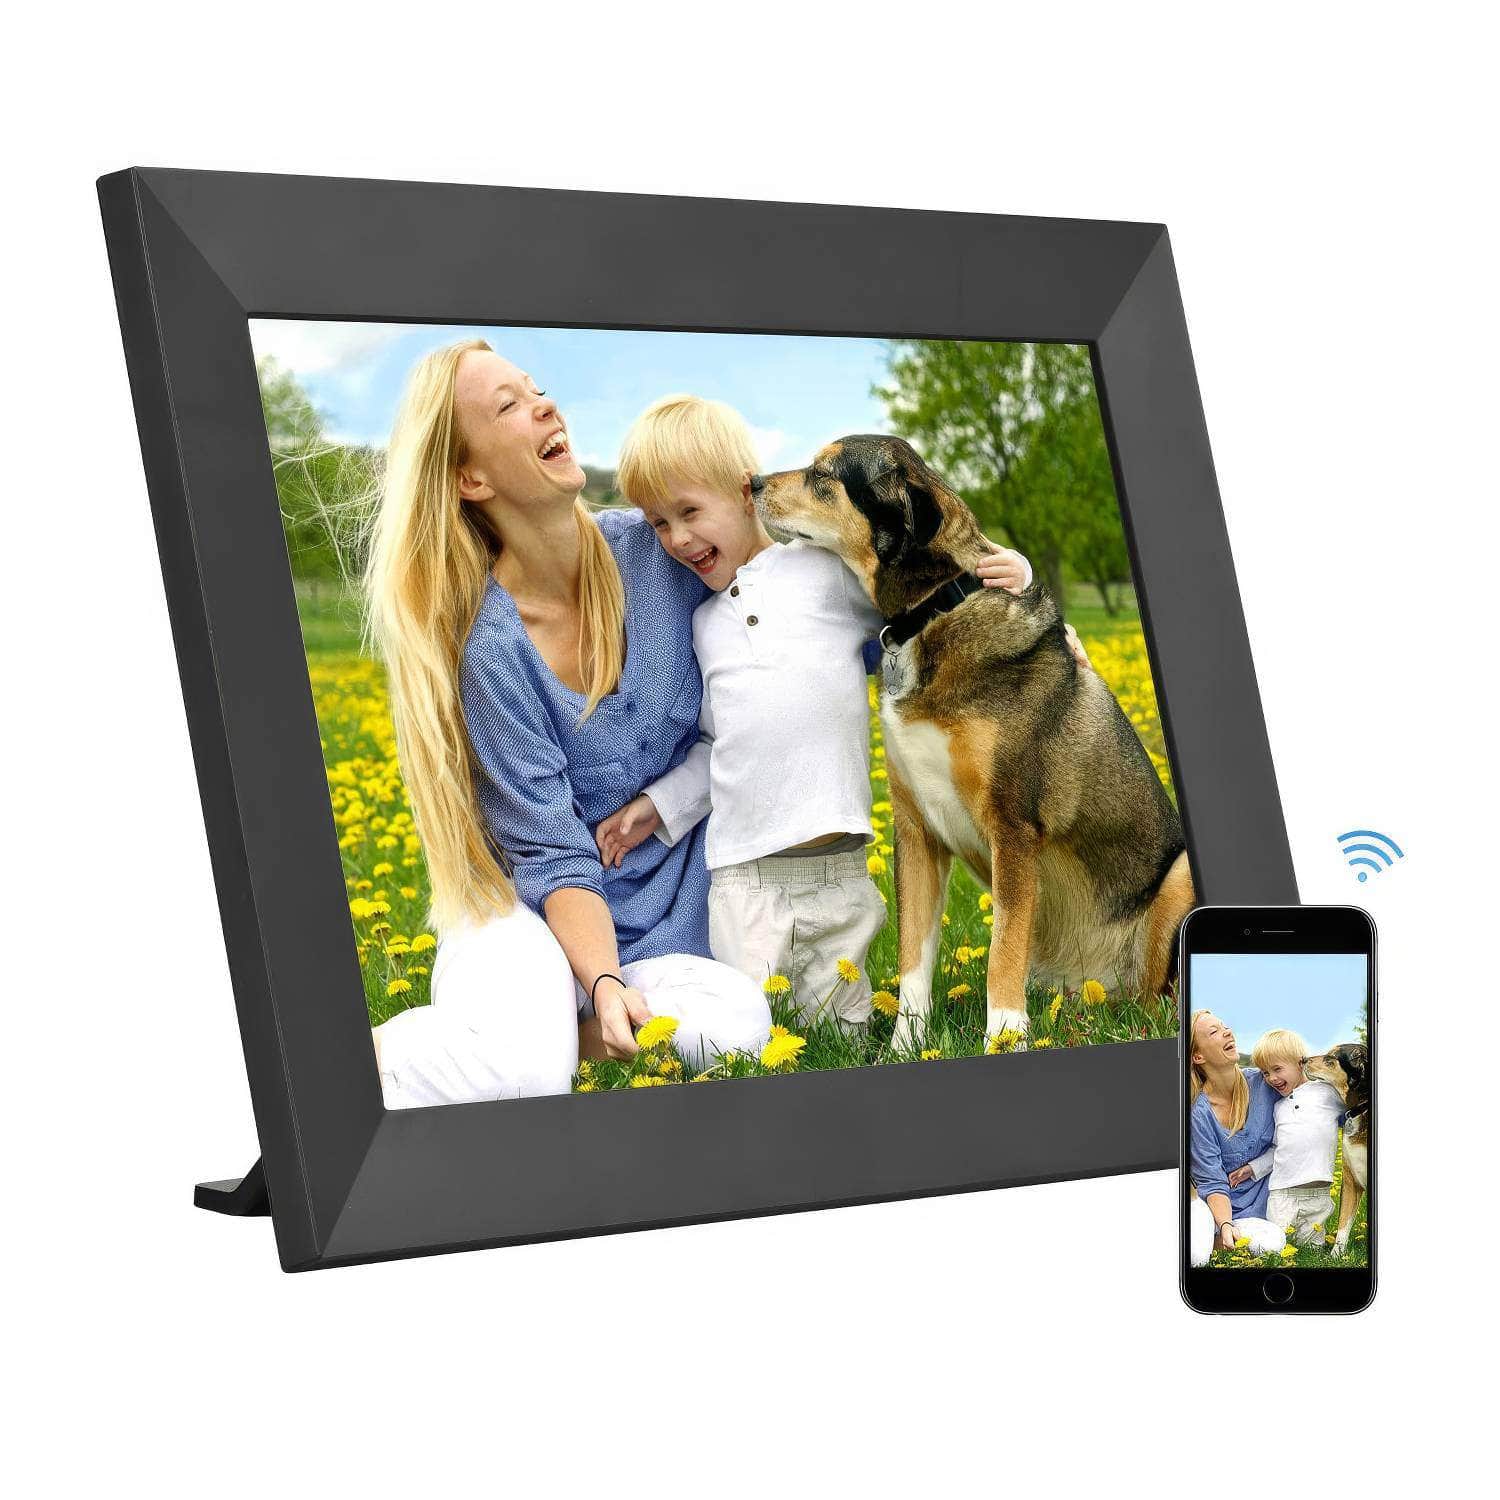 Andoer 10.1-Inch Smart WiFi Digital Picture Frame - HD IPS Touch Screen, Auto Rotation, Photo Sharing via APP